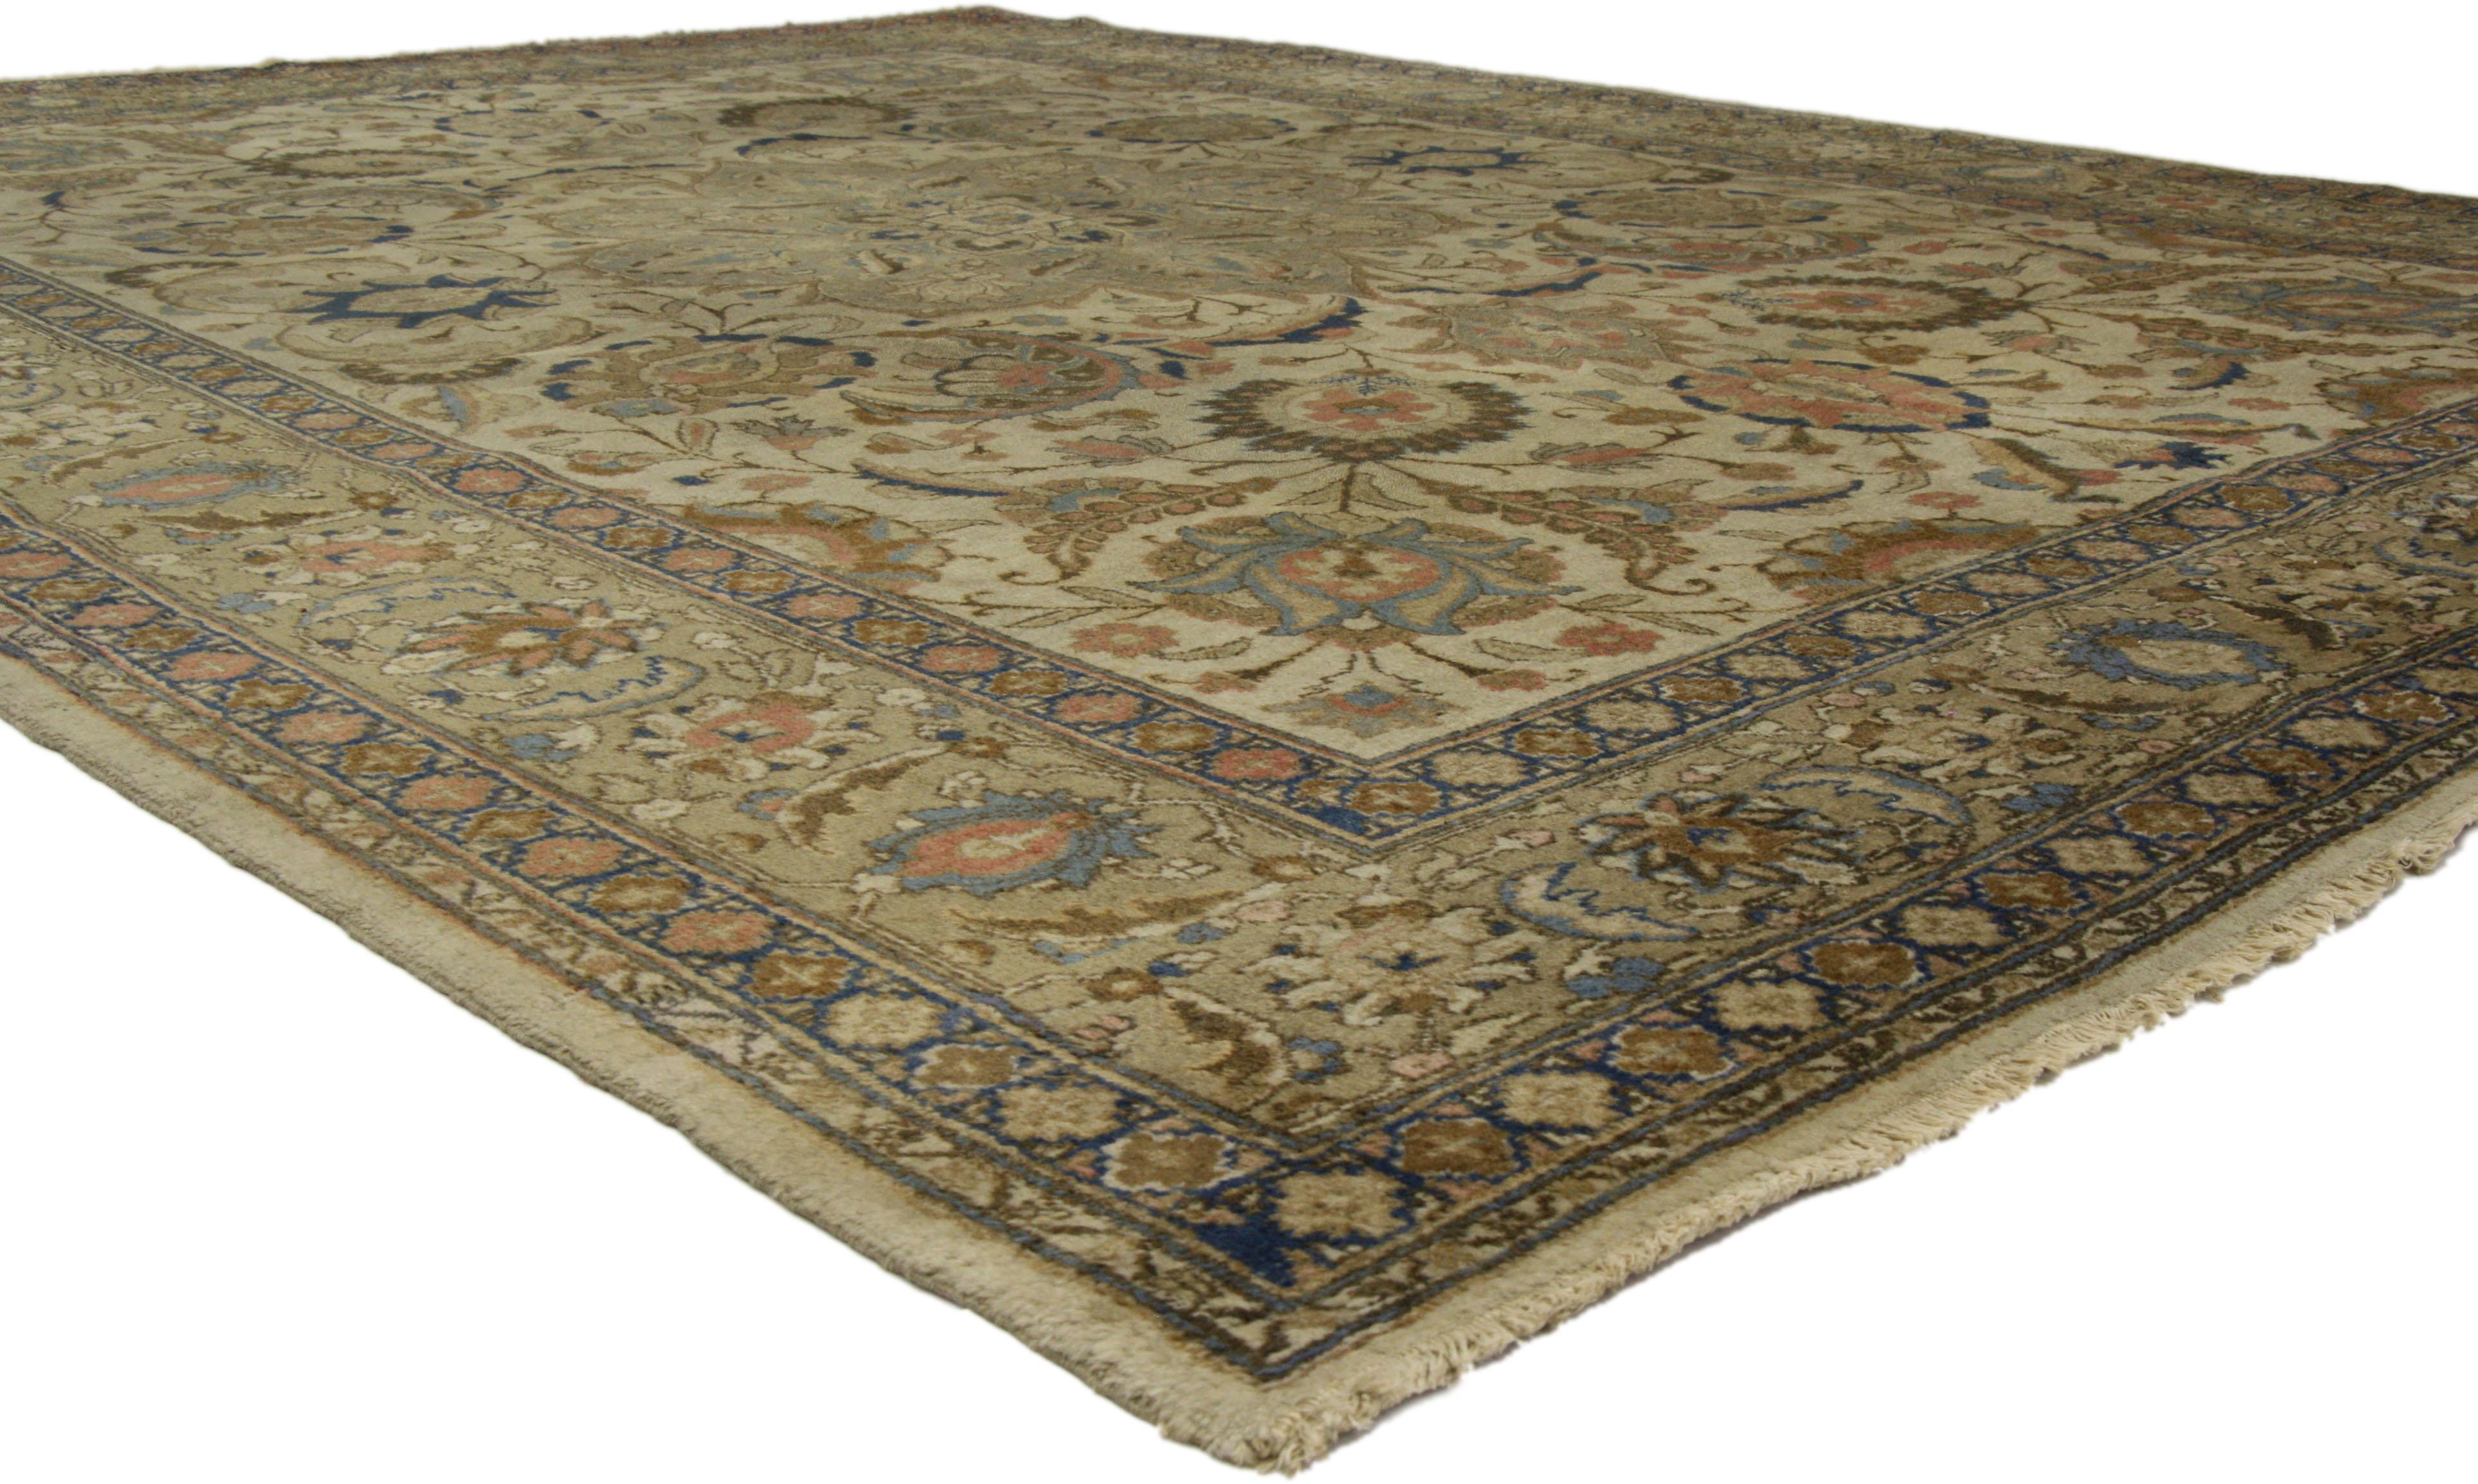 73338 Distressed Antique Persian Tabriz Area Rug with Traditional Style. Embodying the highly decorative aesthetic and neutral color palette sought by many, this breathtaking distressed hand-knotted wool antique Persian Tabriz rug highlights a